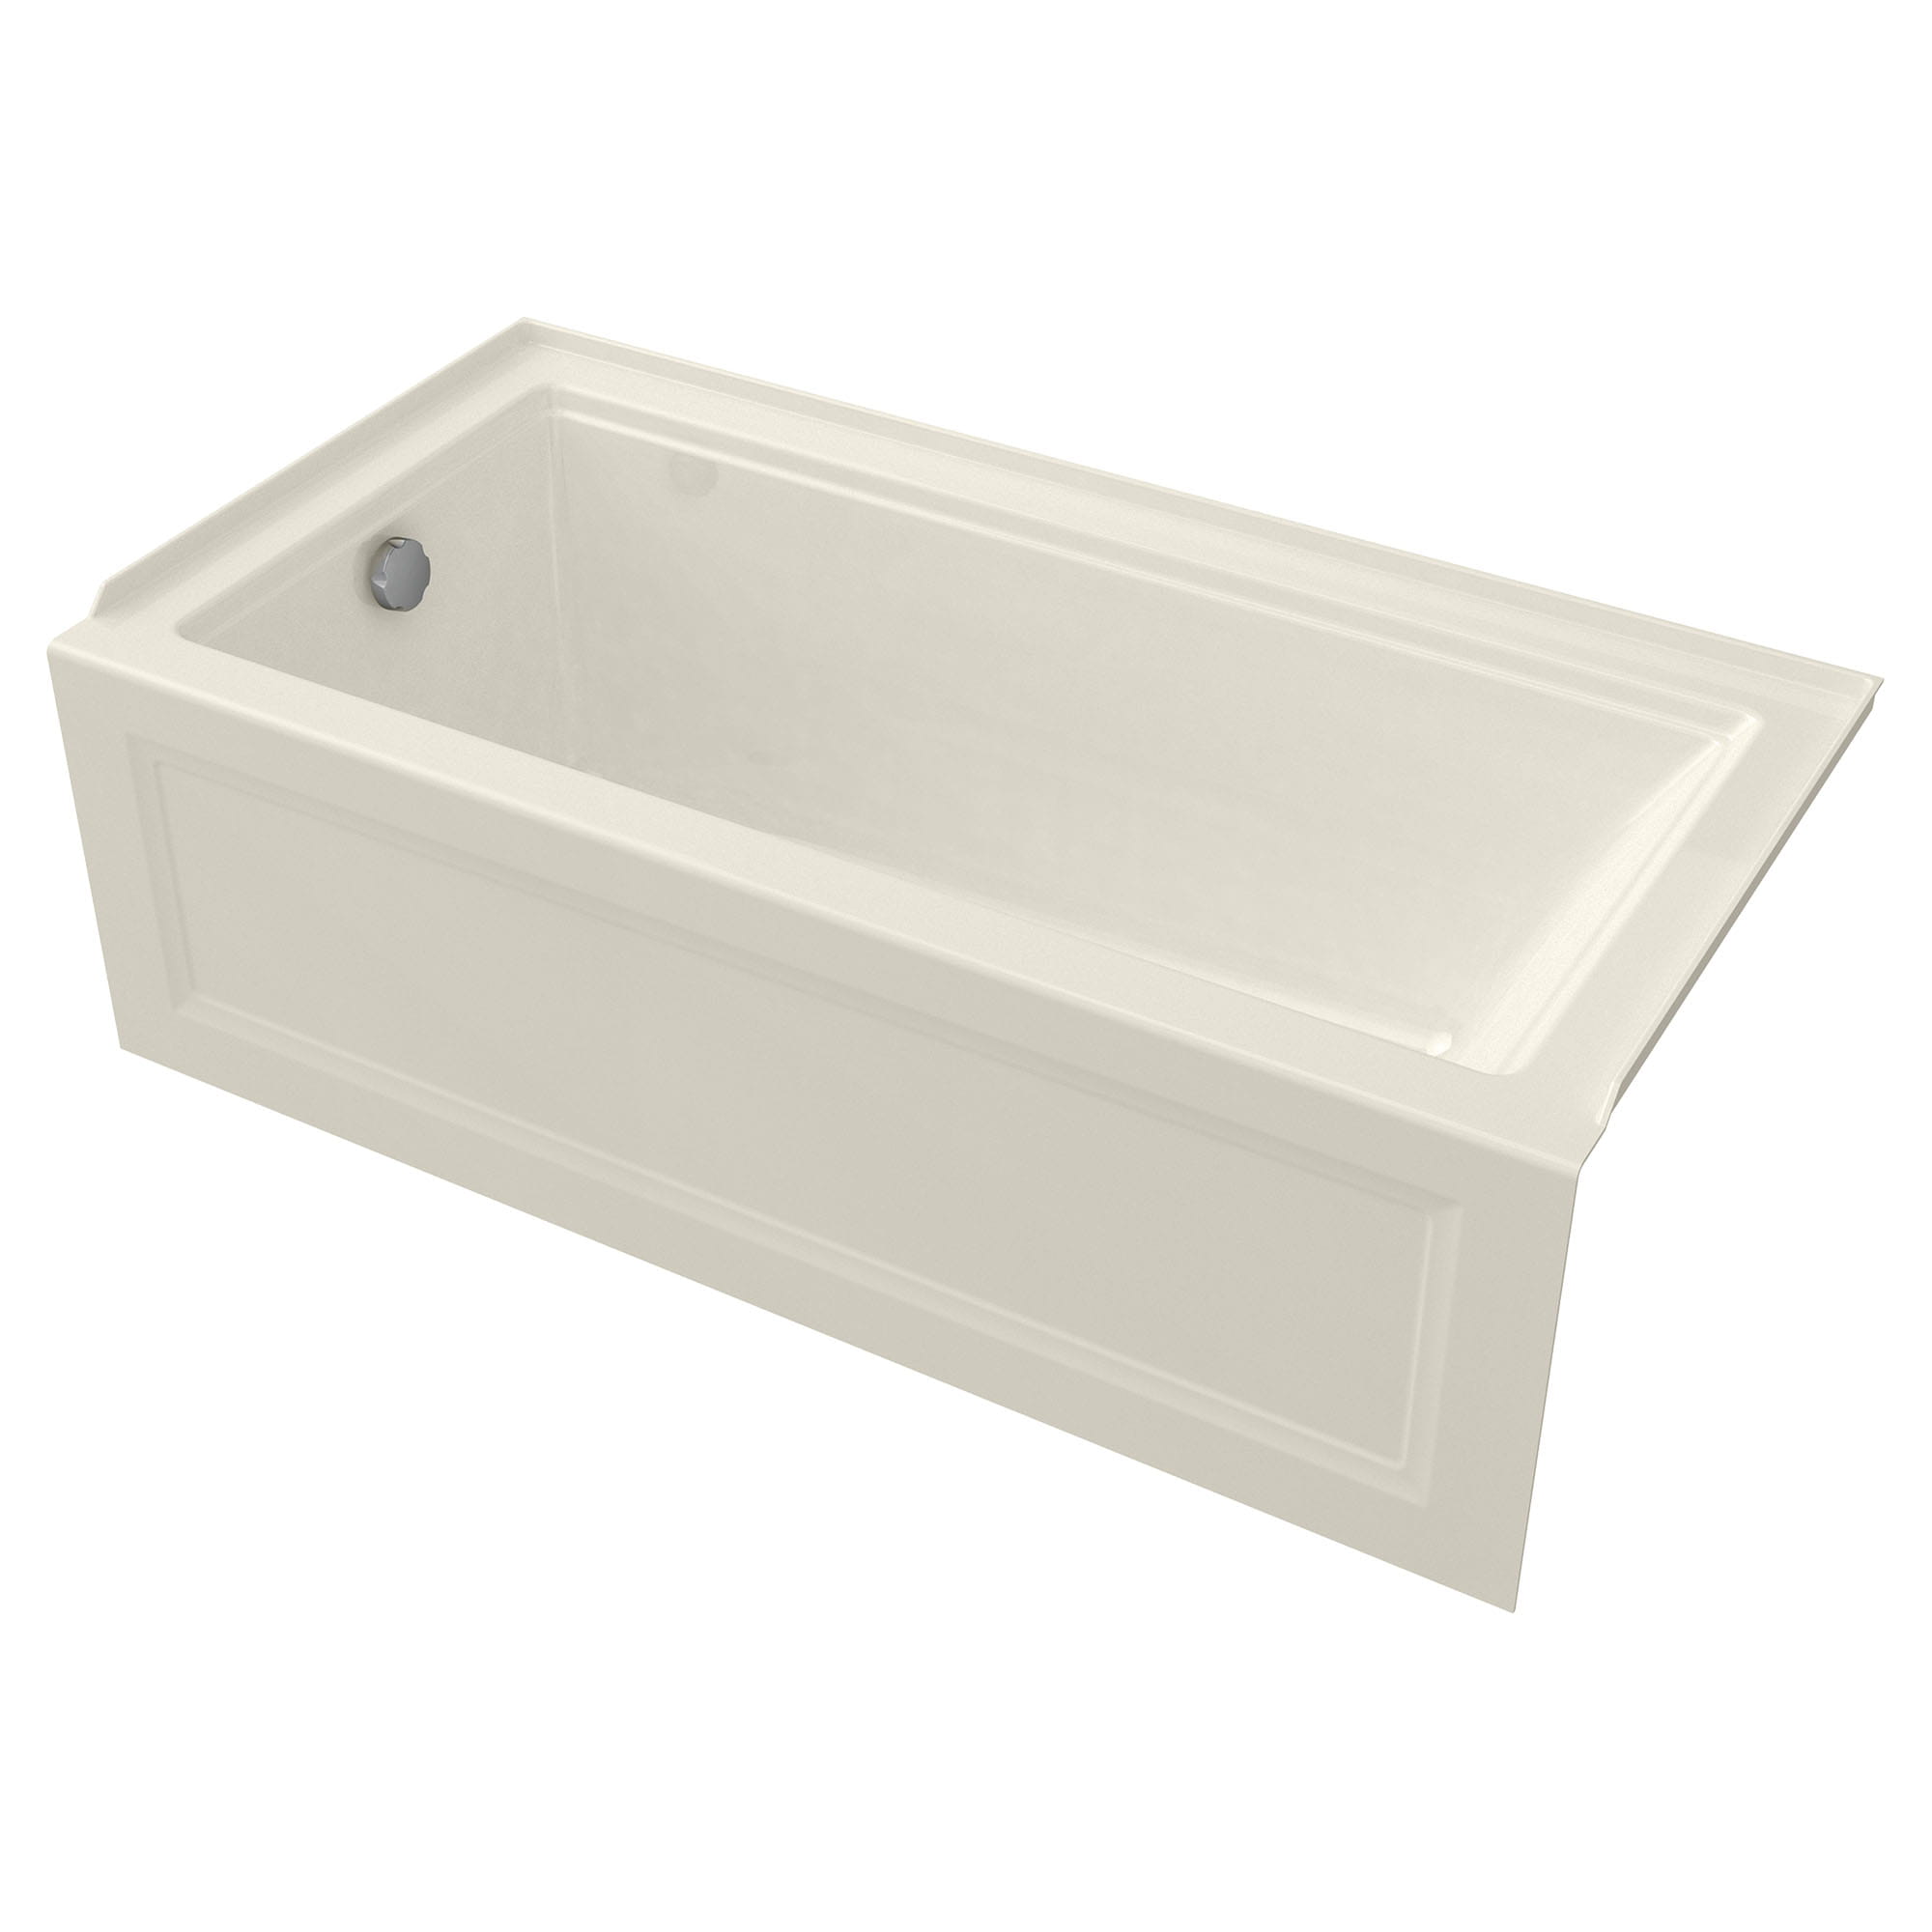 Town Square S 60 x 30 Inch Integral Apron Bathtub With Left Hand Outlet LINEN